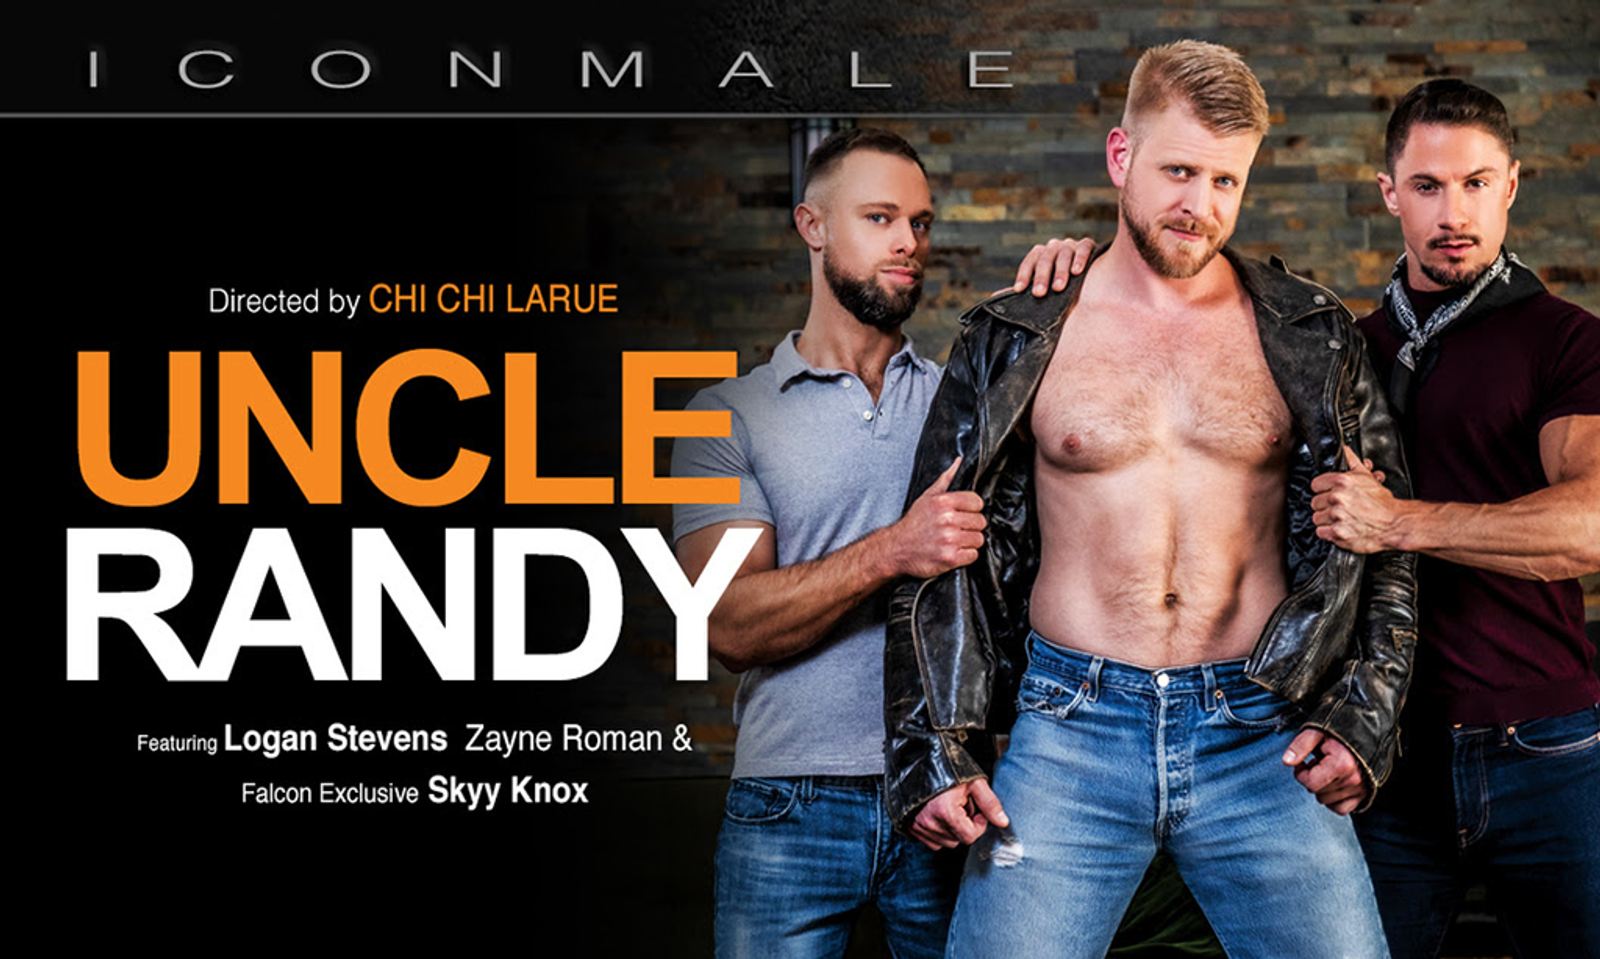 Chi Chi LaRue Directs ‘Uncle Randy’ for Icon Male